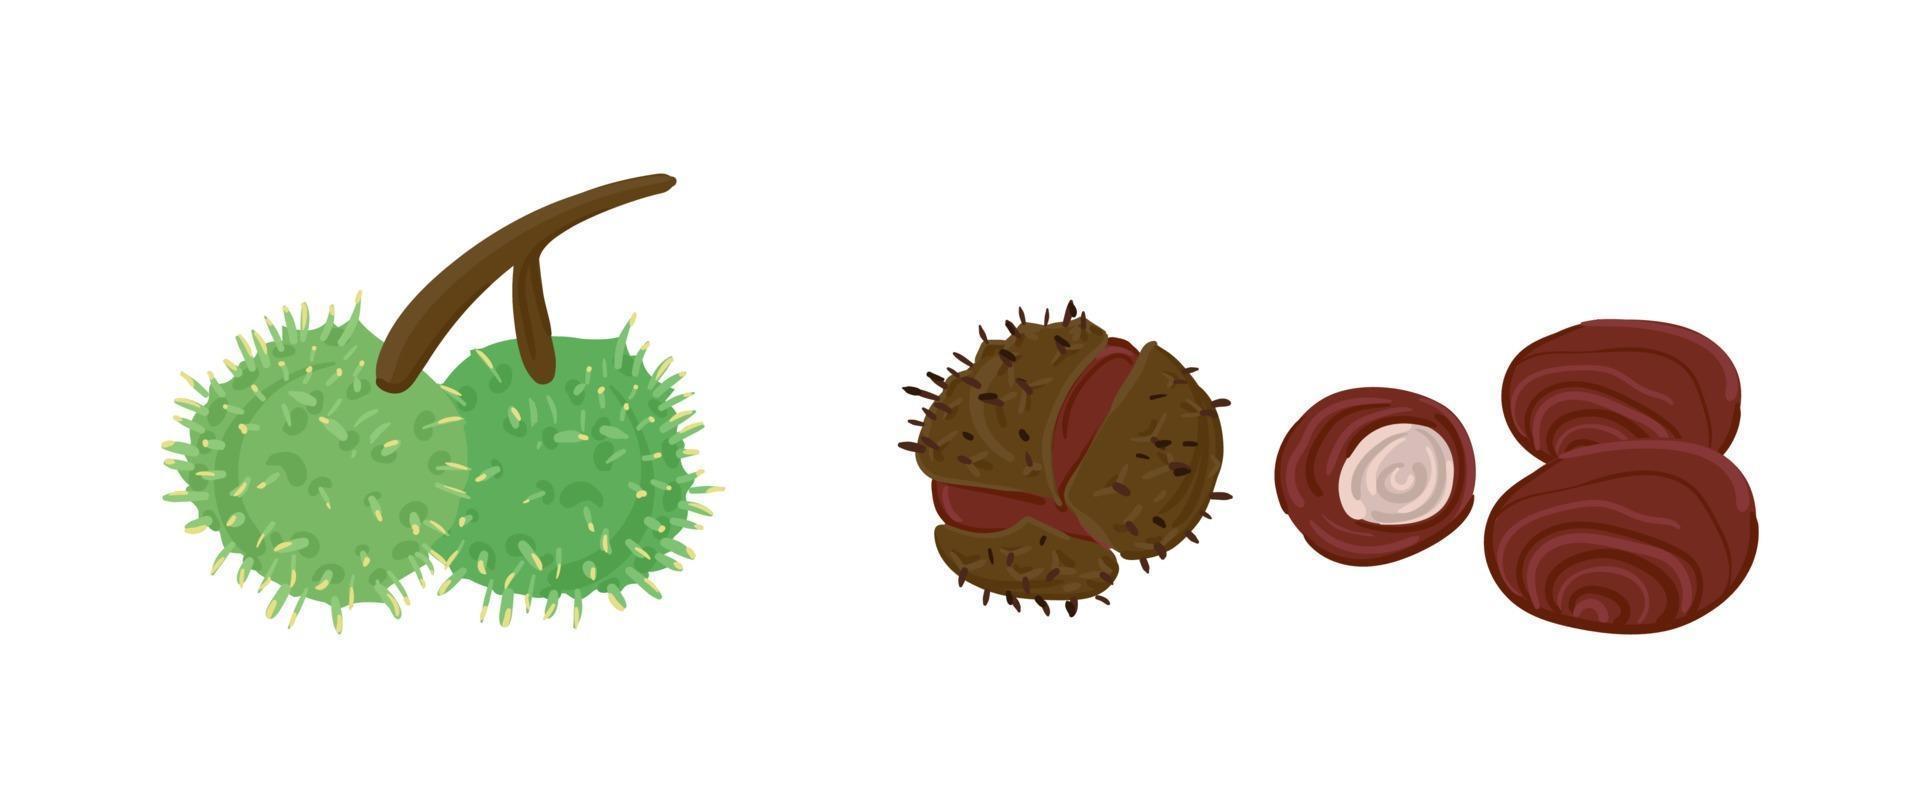 Hand Drawn Chestnut Fruit with and without green peel vector